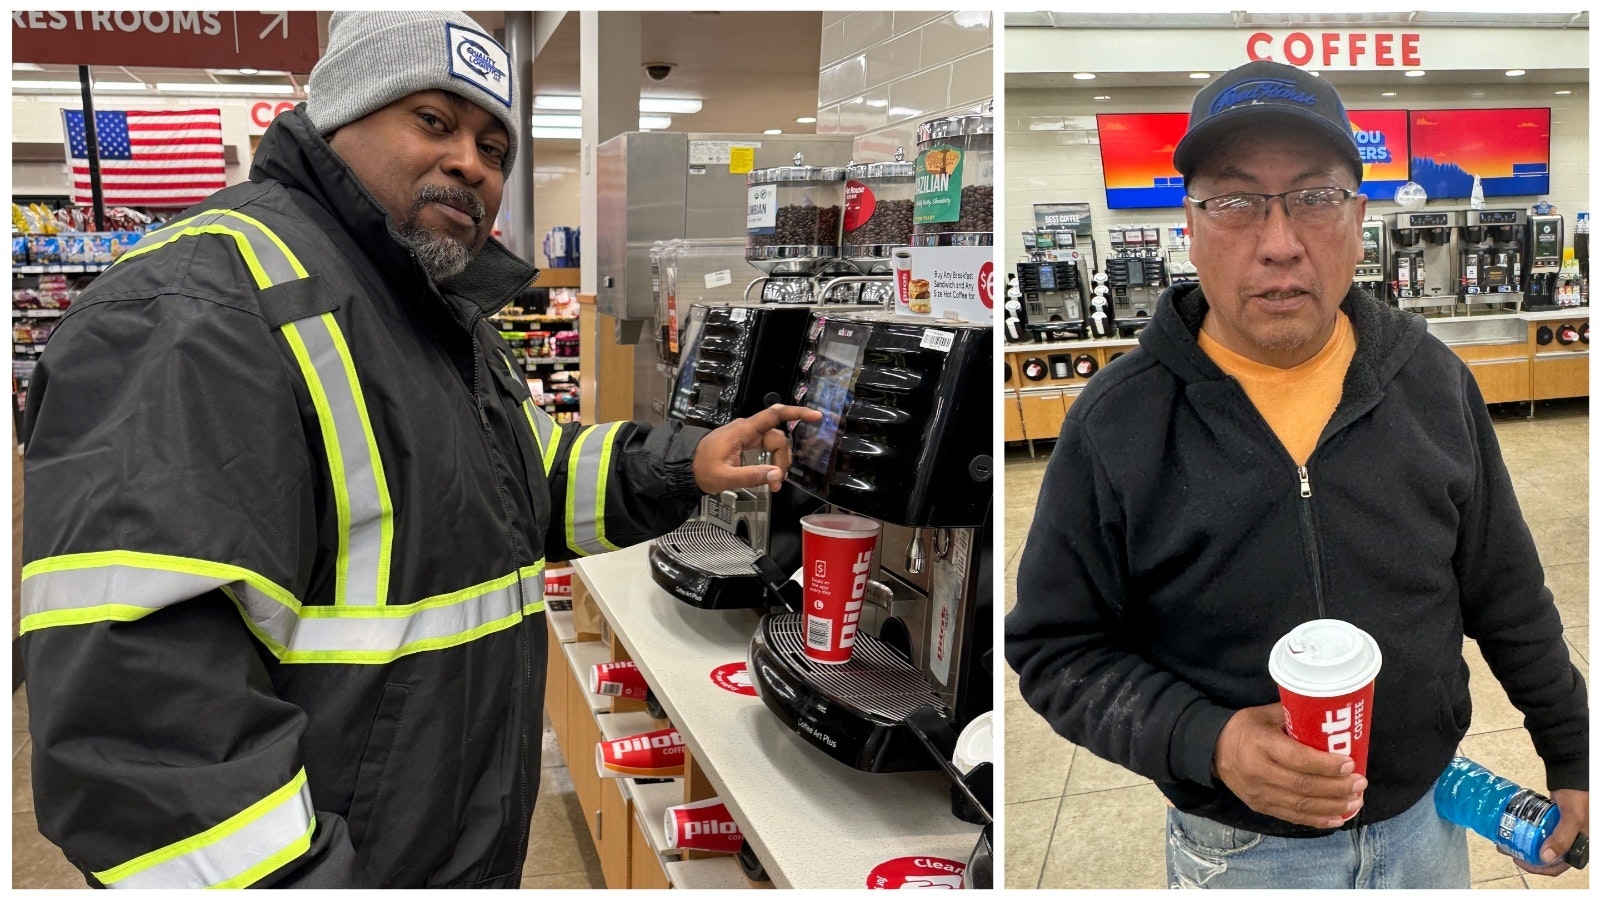 Truckers Cometric Wright, left, and Gilbert Ben say they'd be unhappy campers if they pulled into a truck stop needing a caffeine jolt and there was no coffee.